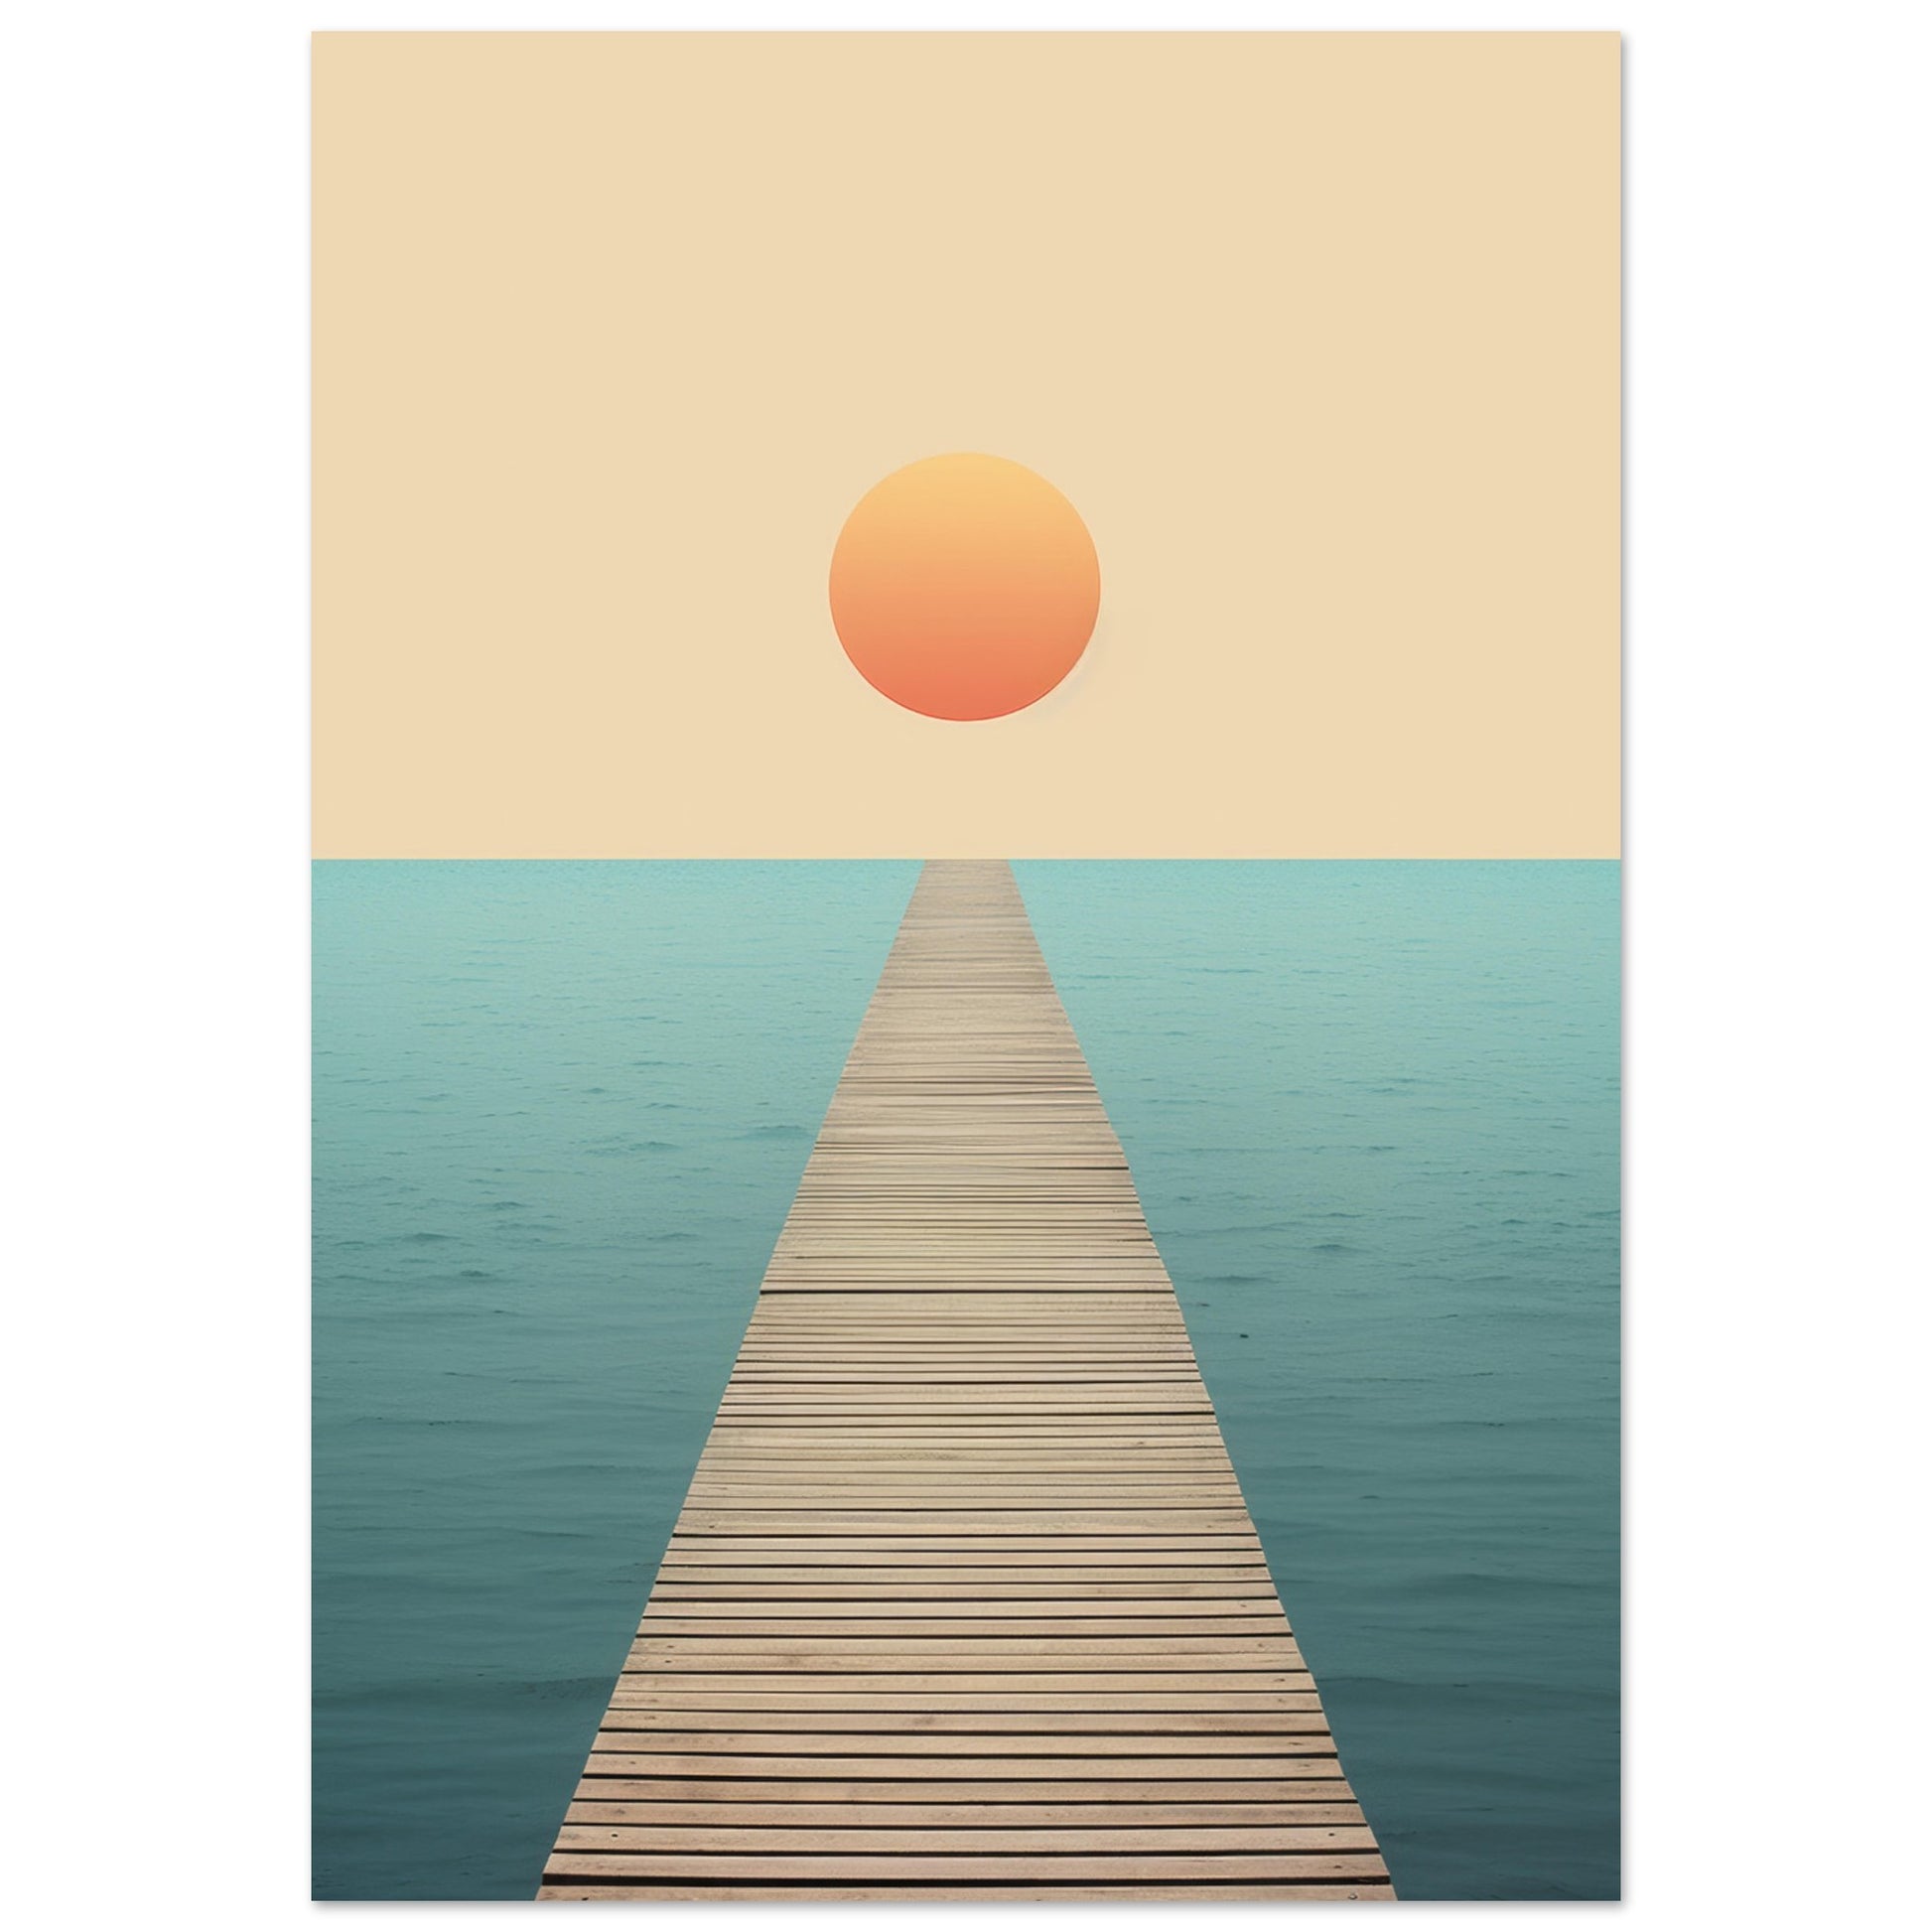 A minimalist art print titled "Follow the Lead" depicting a wooden footbridge extending towards a radiant sun on the horizon, set against a backdrop of serene turquoise waters. This evocative piece captures the essence of life's journey, hope, and the beauty of the unknown. A perfect choice for those seeking solace and inspiration in art.